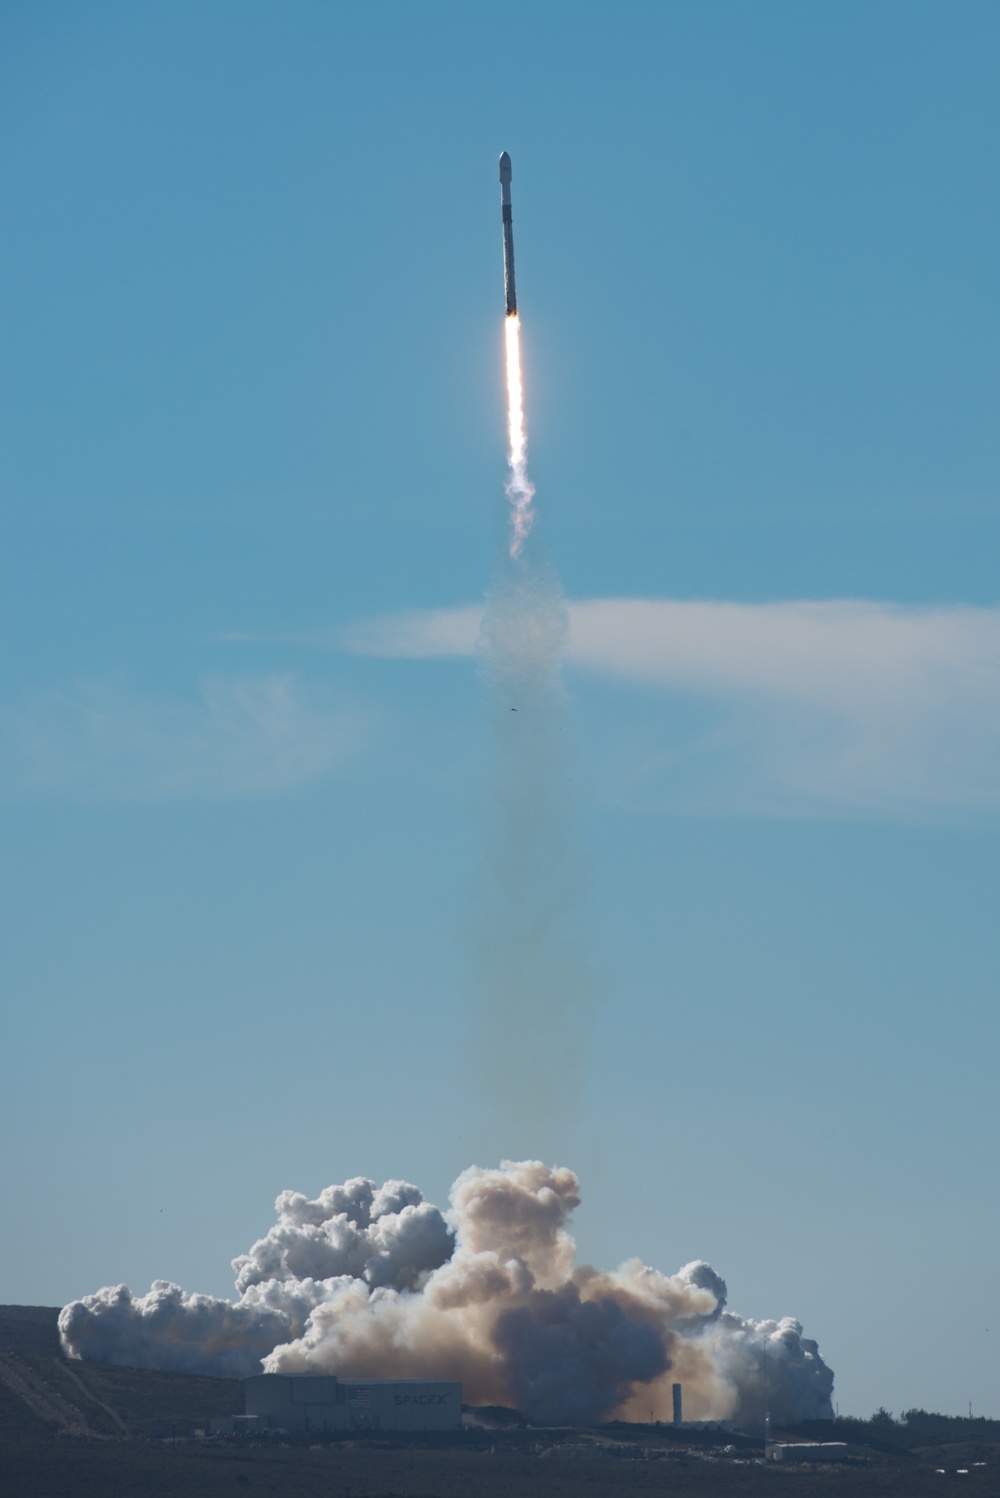 SpaceX Falcon 9 SSO-A launches from Vandenberg